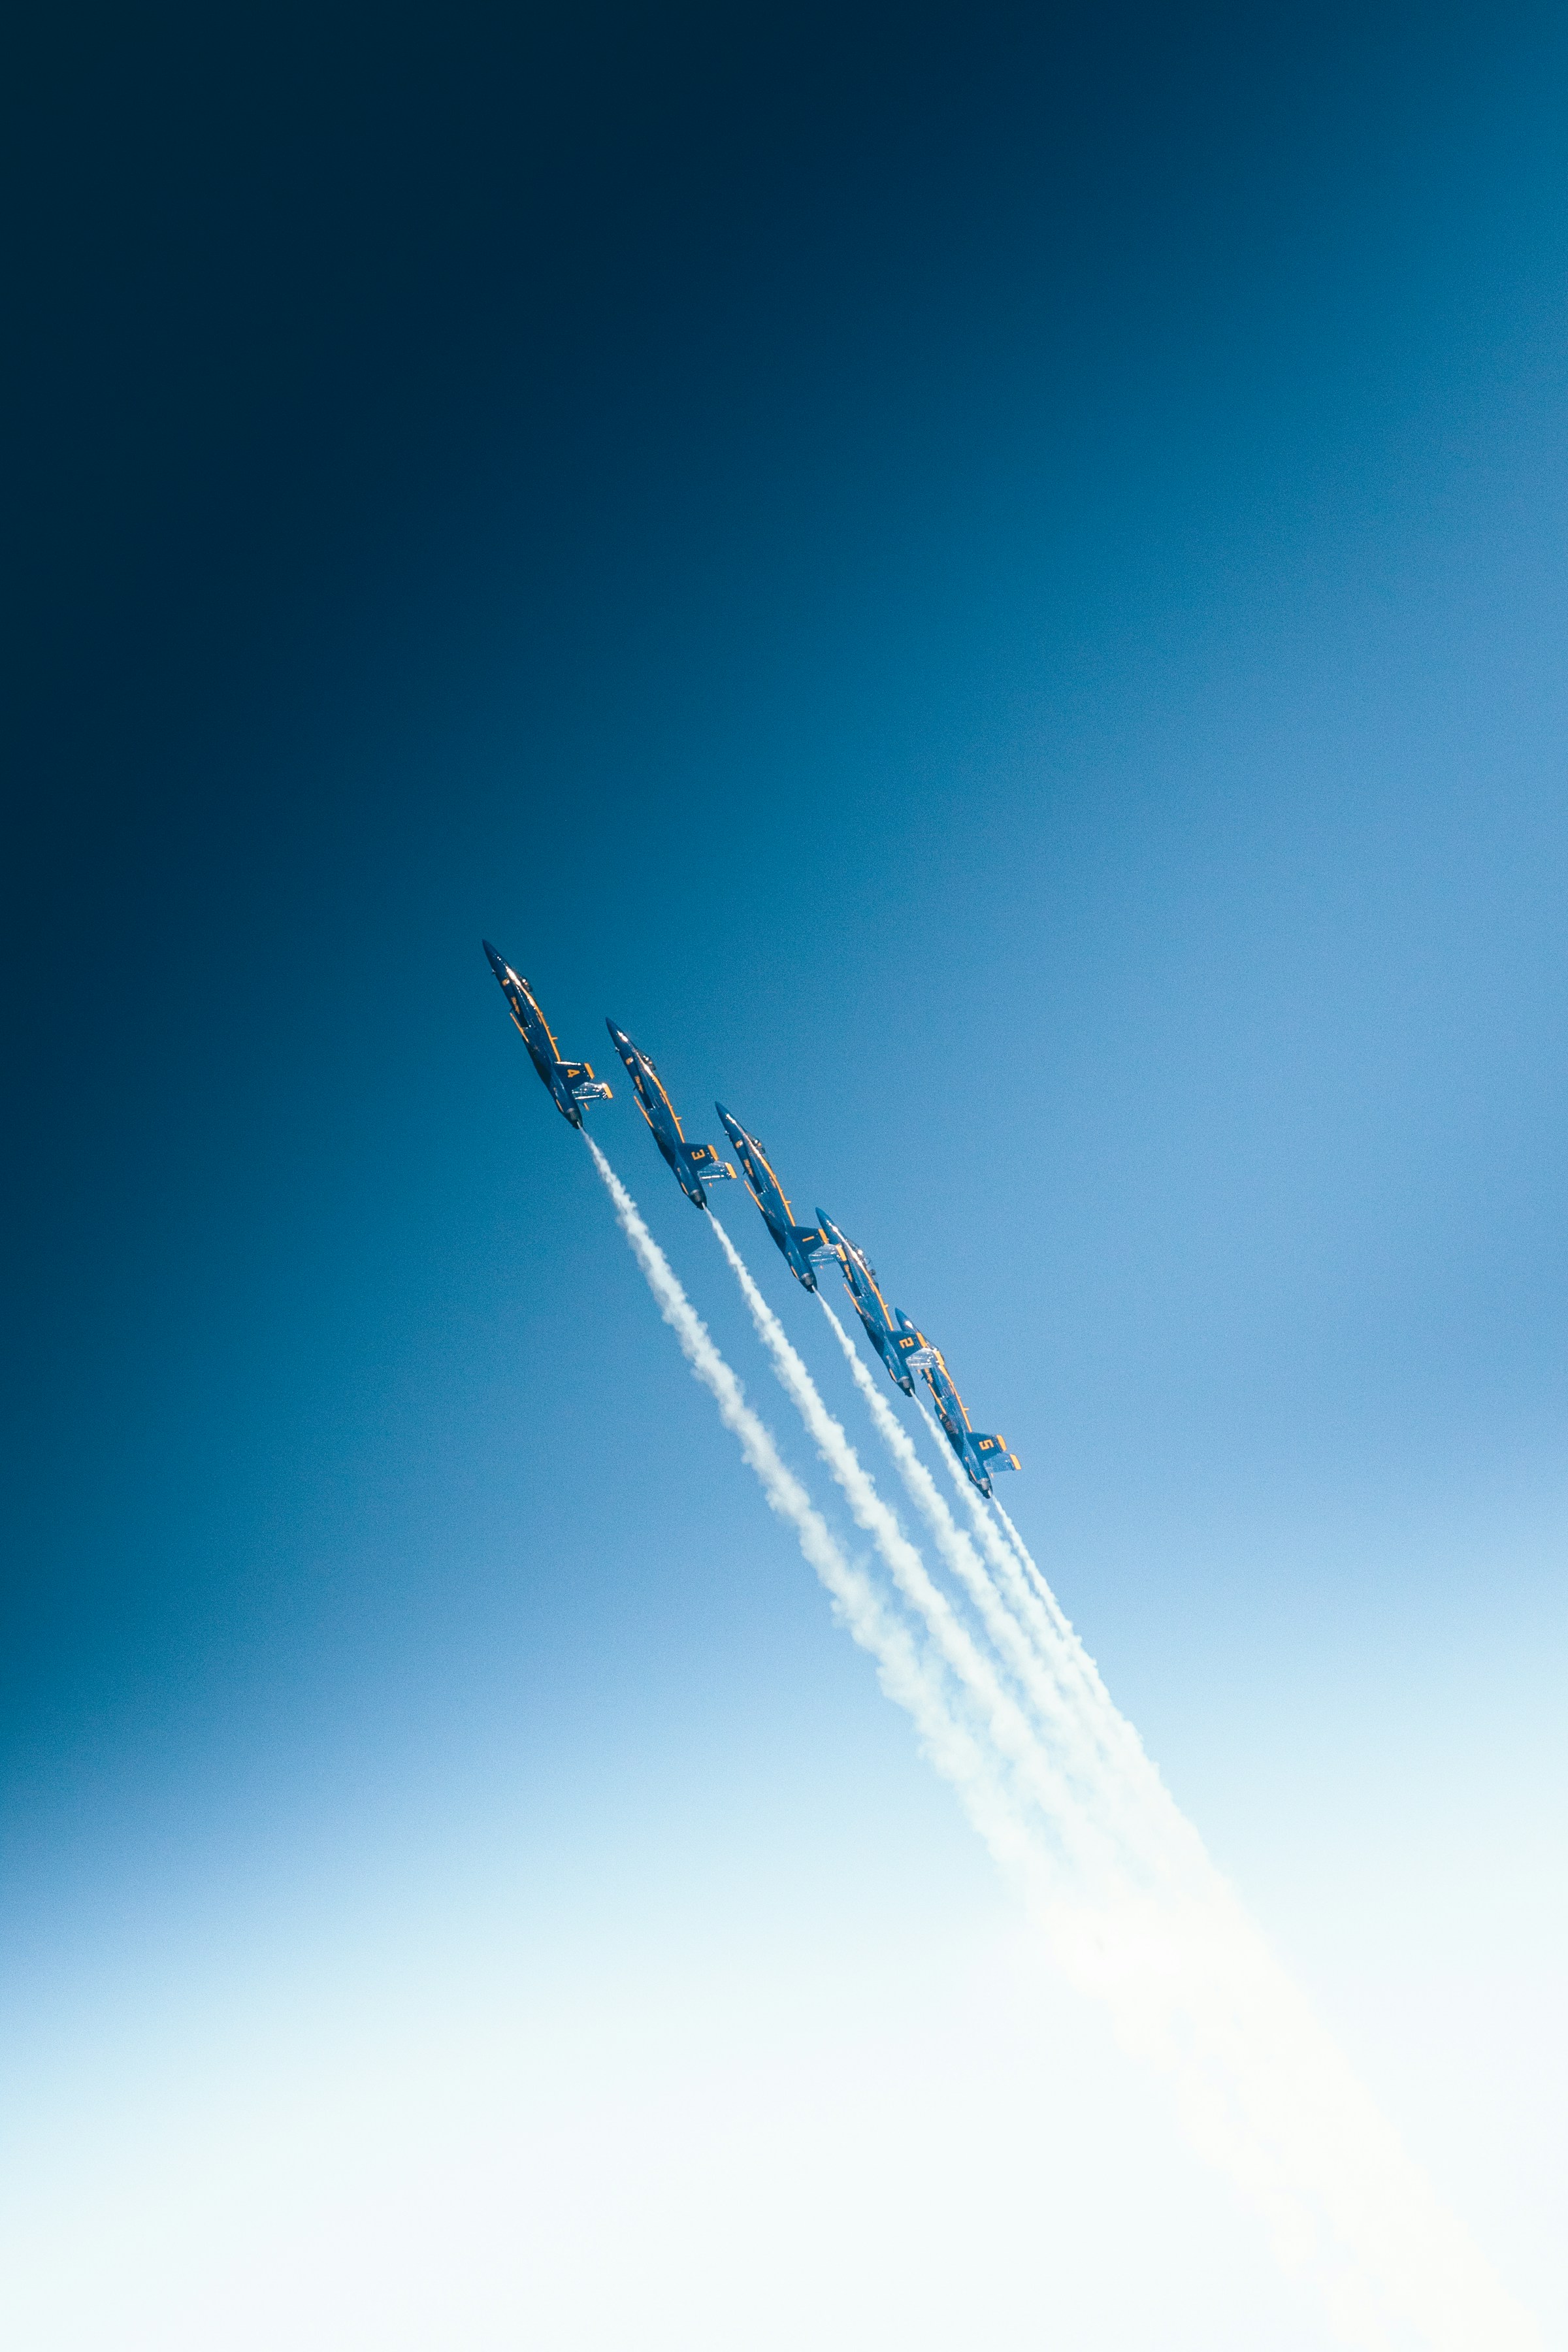 Five jet planes leaving a white trail in the blue sky.